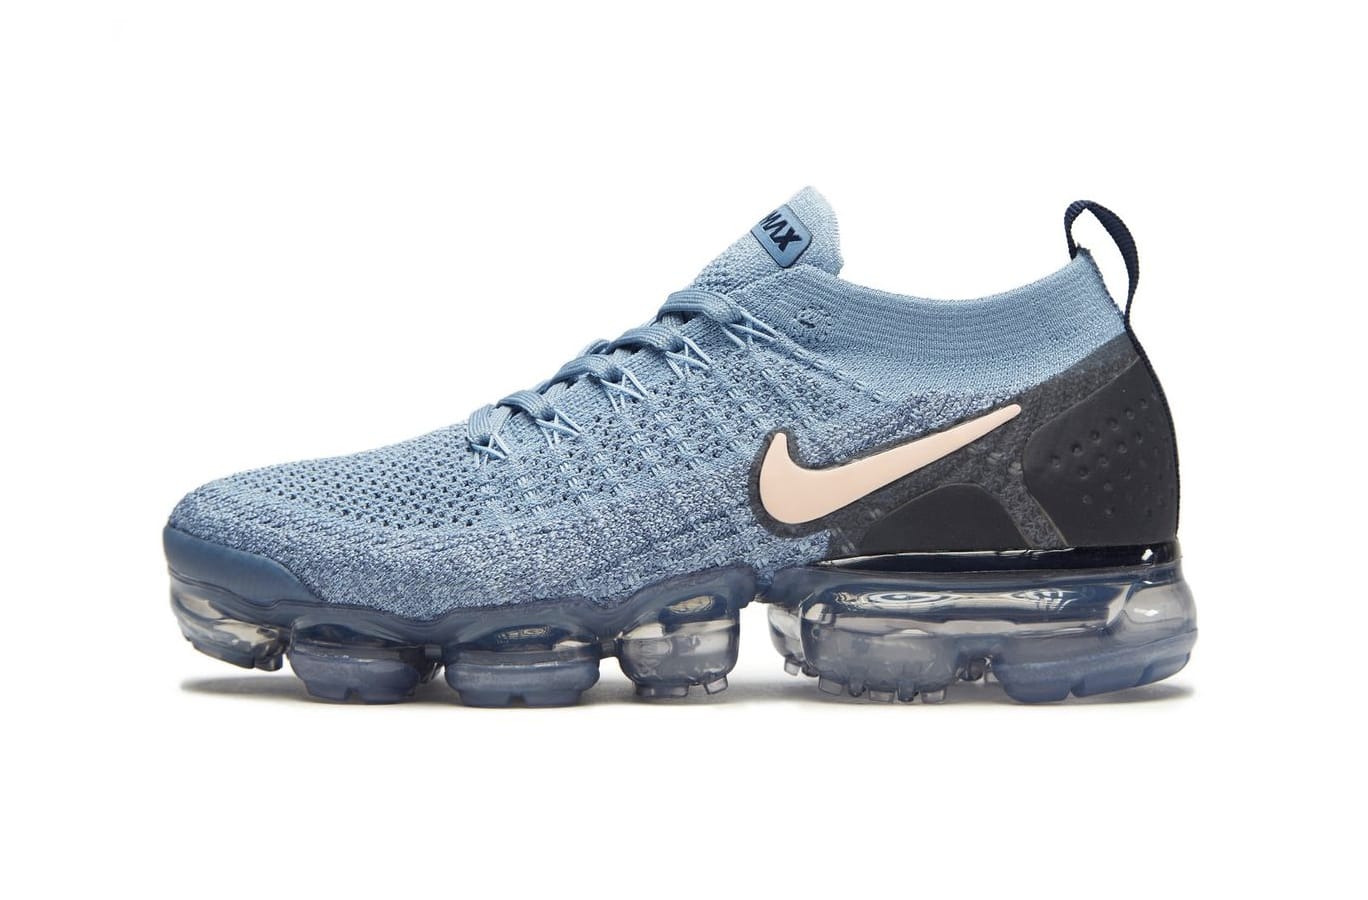 Air VaporMax Flyknit 2.0 in Baby Blue 